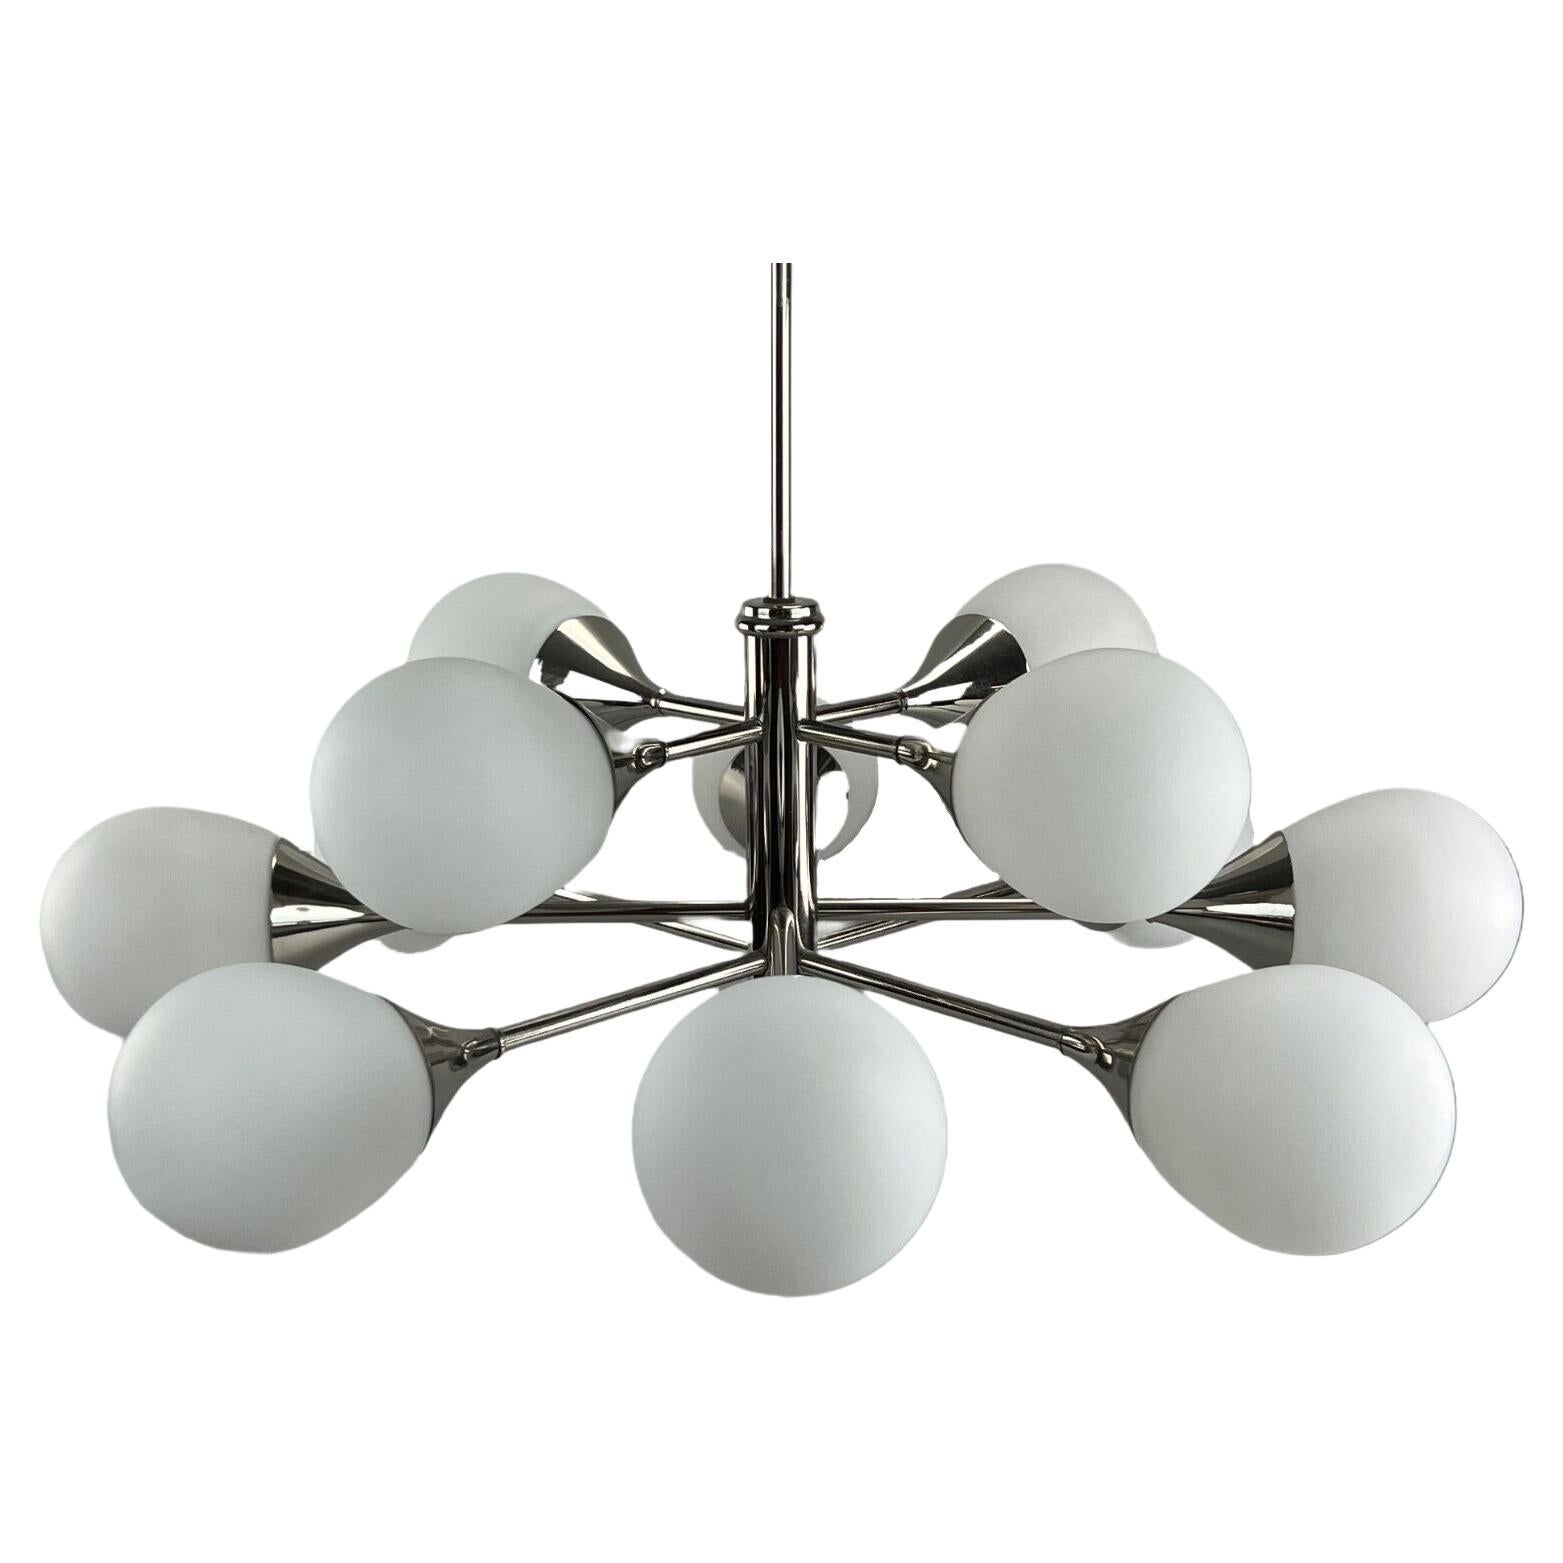 12-Flame Sputnik Chandelier from the 1960s and 1970s, Kaiser Leuchten, Opal Glas For Sale